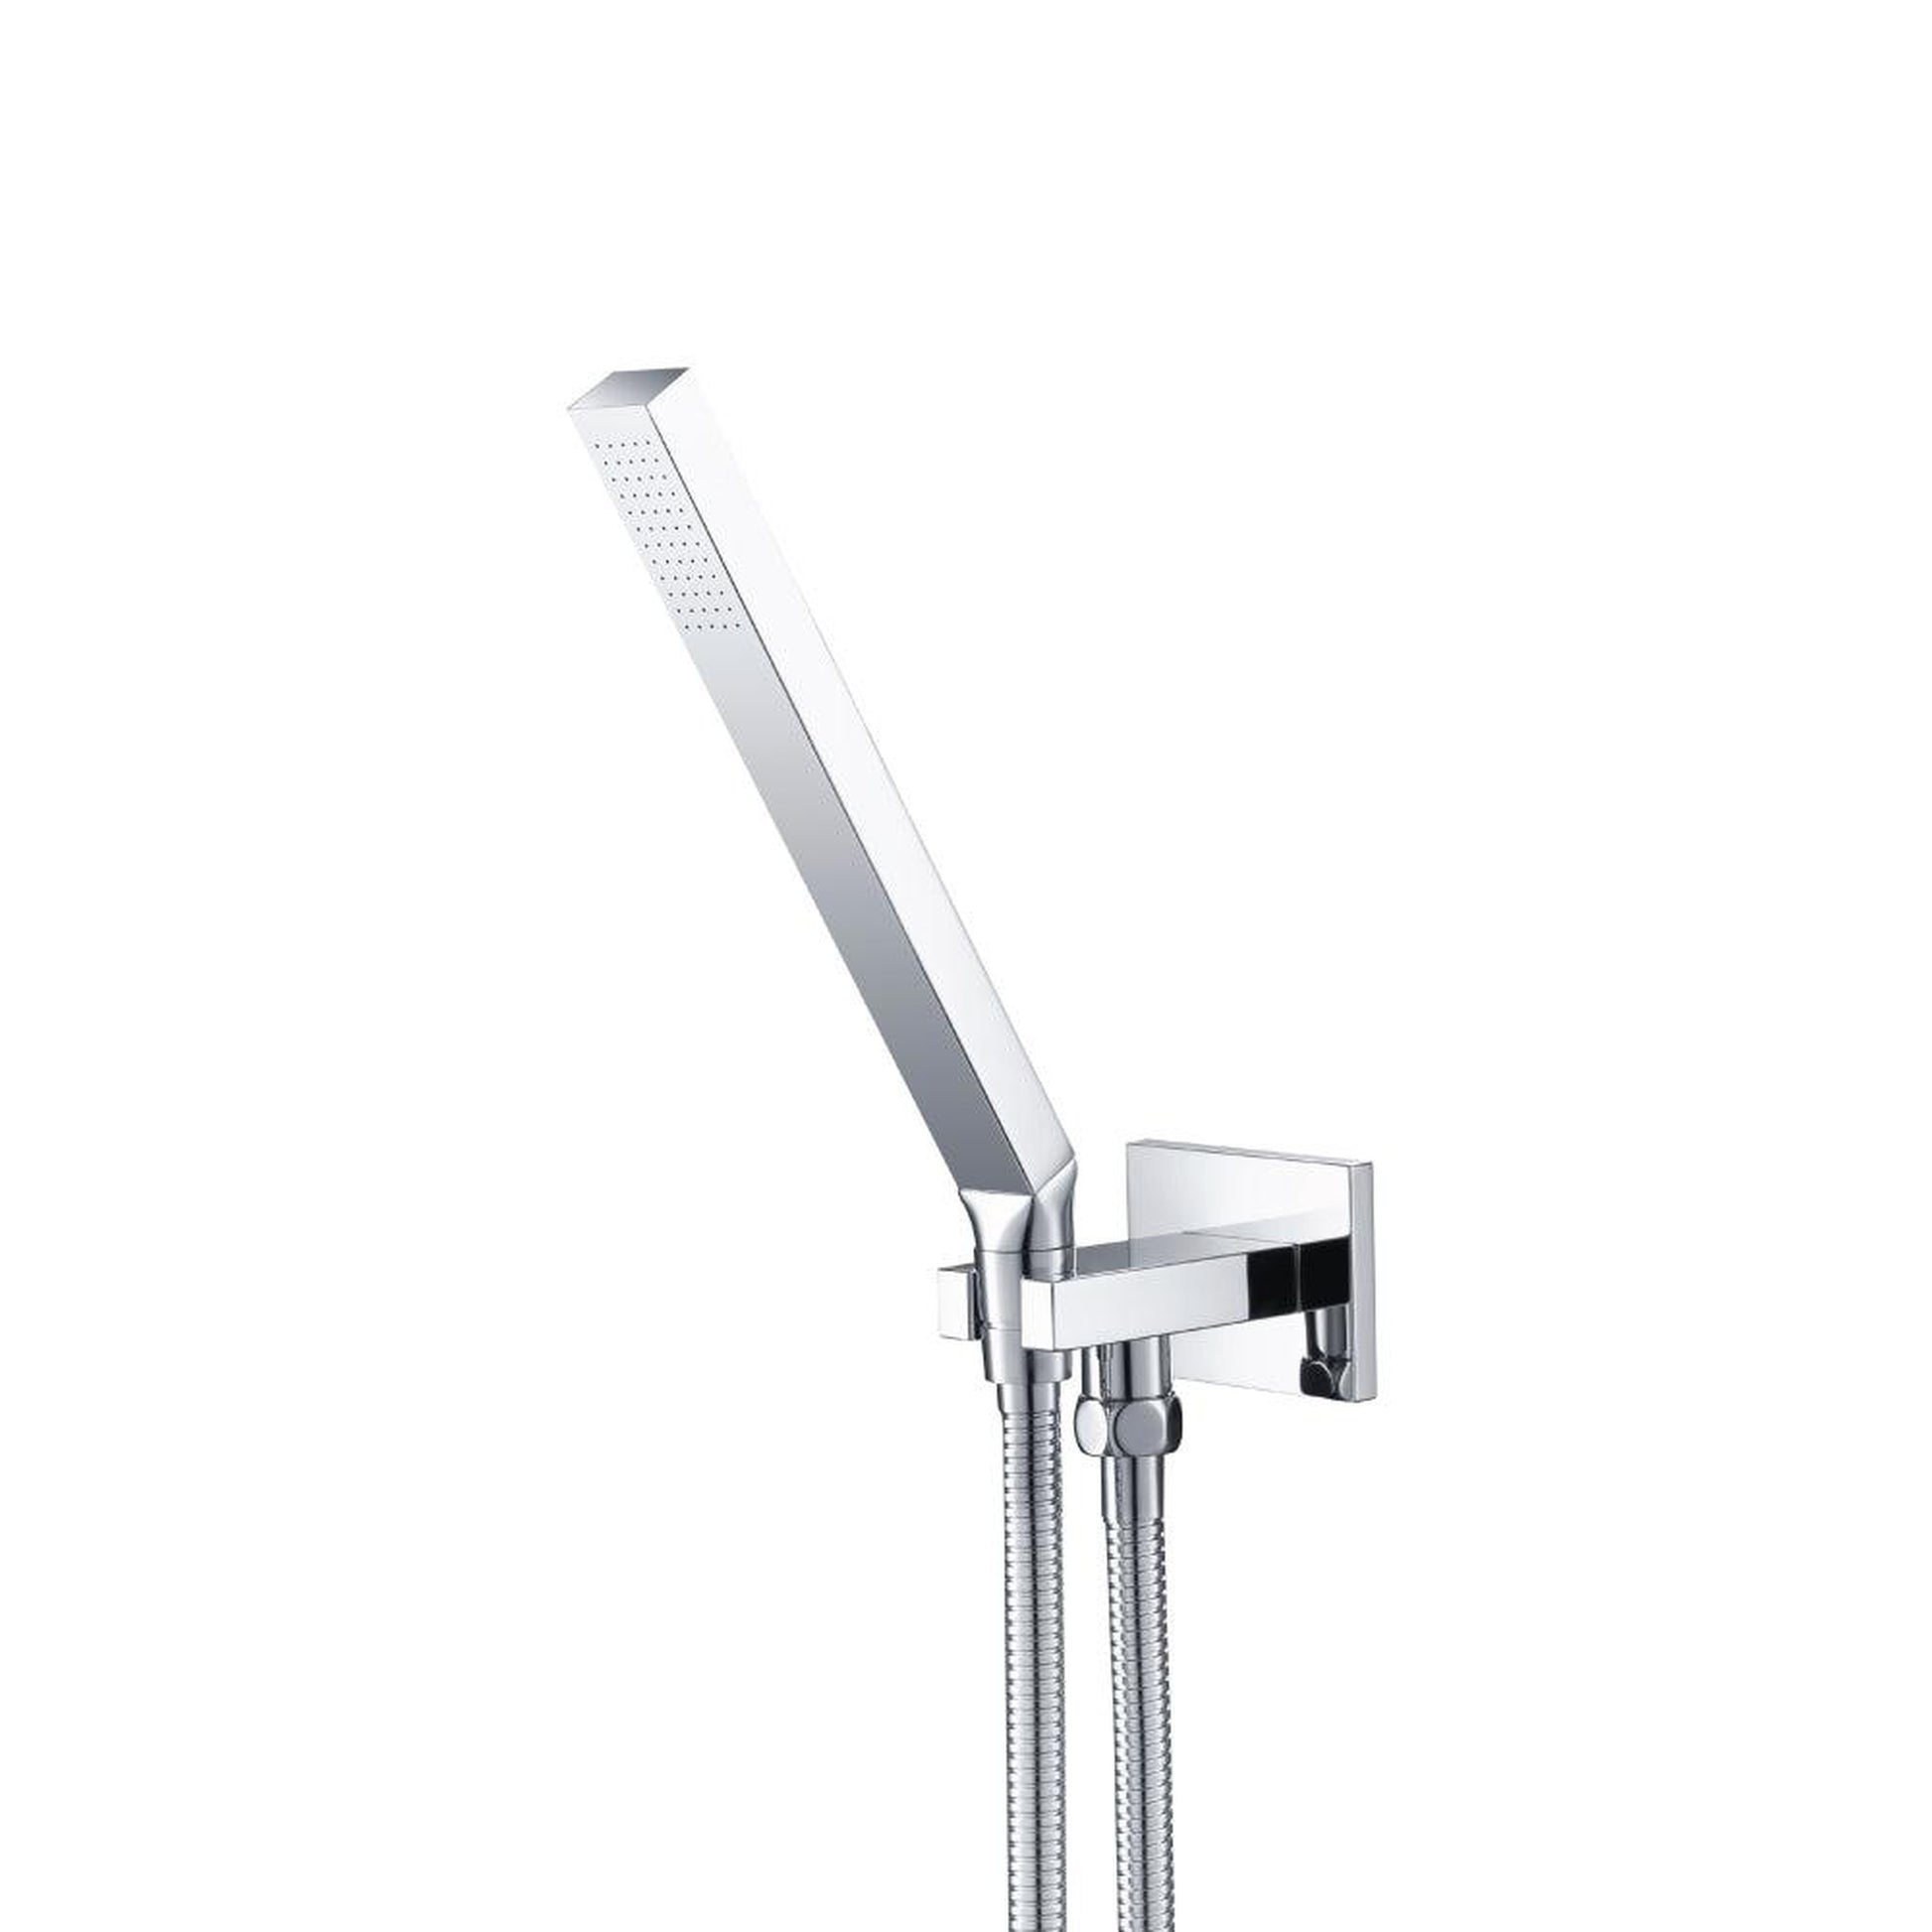 Isenberg Universal Fixtures Hand Shower Set With Wall Elbow, Holder and Hose in Chrome (HS1003CP)